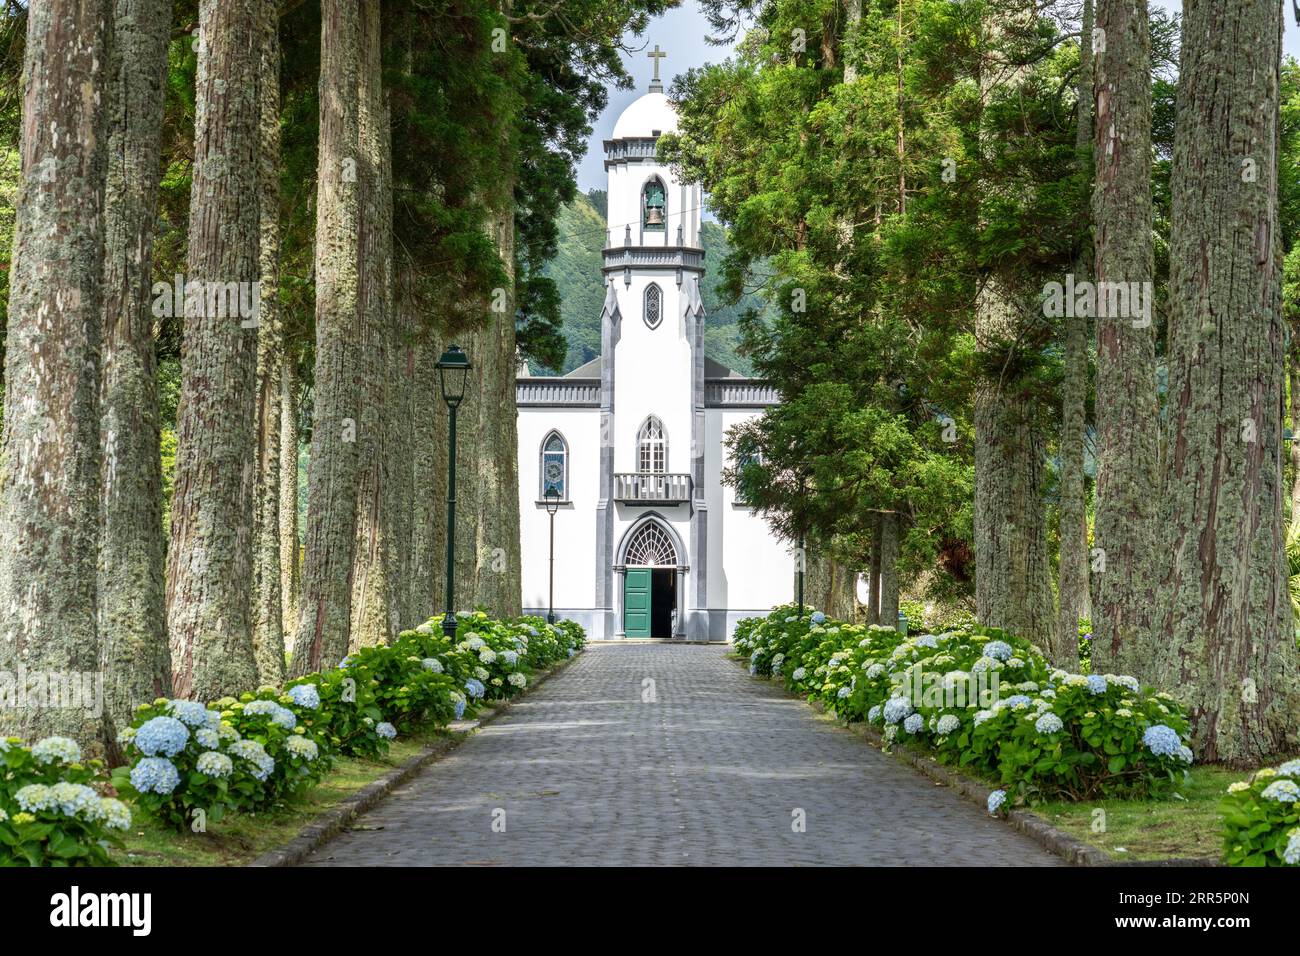 Igreja de São Nicolau or Saint Nicholas Church framed by plane trees and blooming hydrangea shrubs in the historic village of Sete Cidades, Sao Miguel, Azores, Portugal. The church, built in 1857 is located in the center of a massive volcanic crater three miles across. Stock Photo